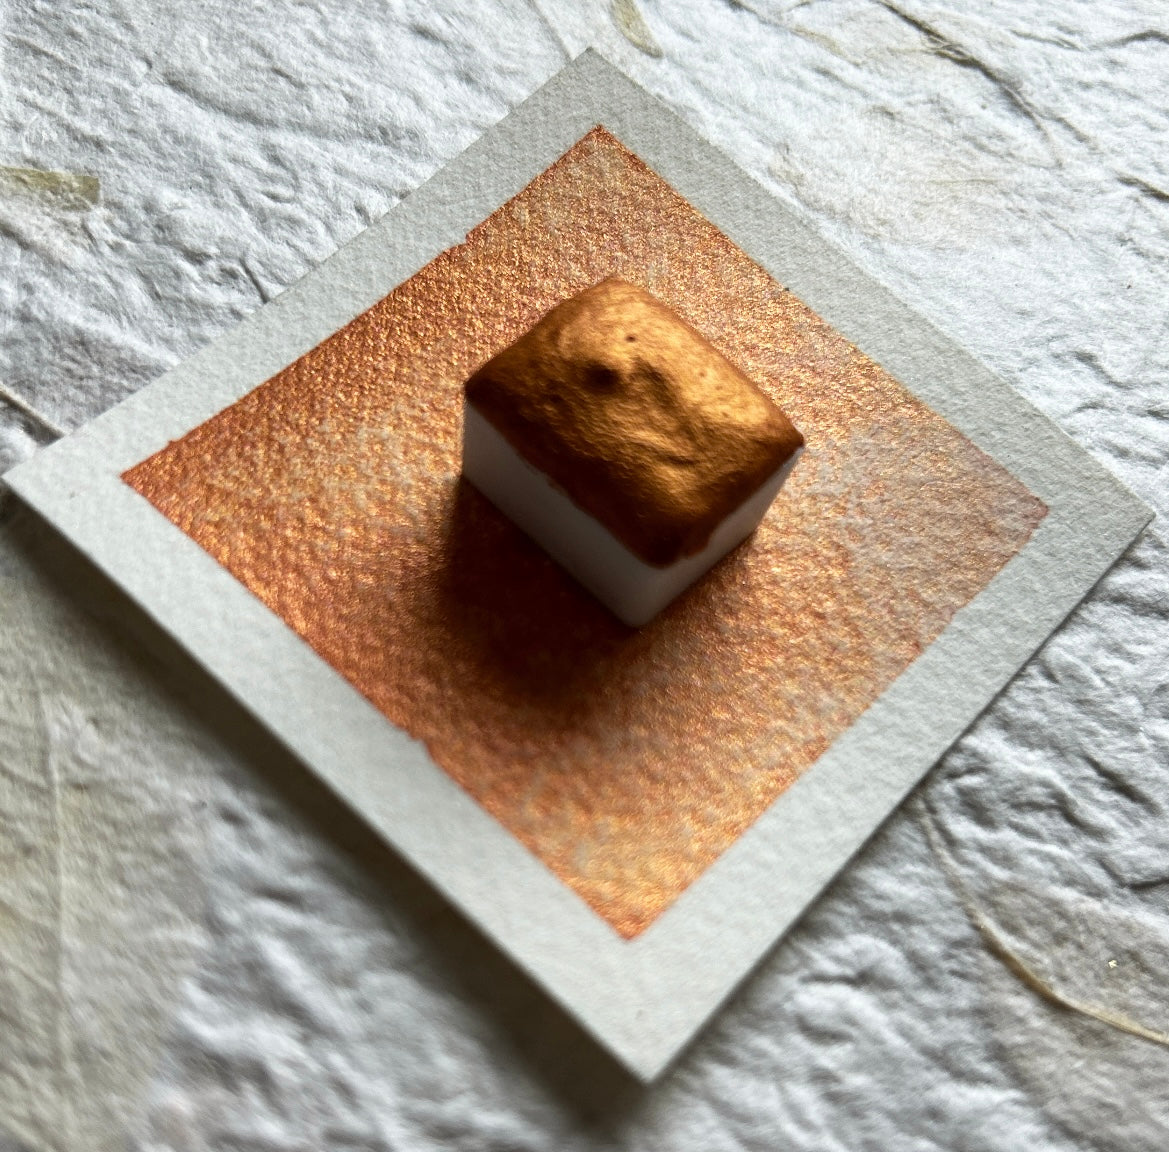 "Apricot" - Synthetic Mica